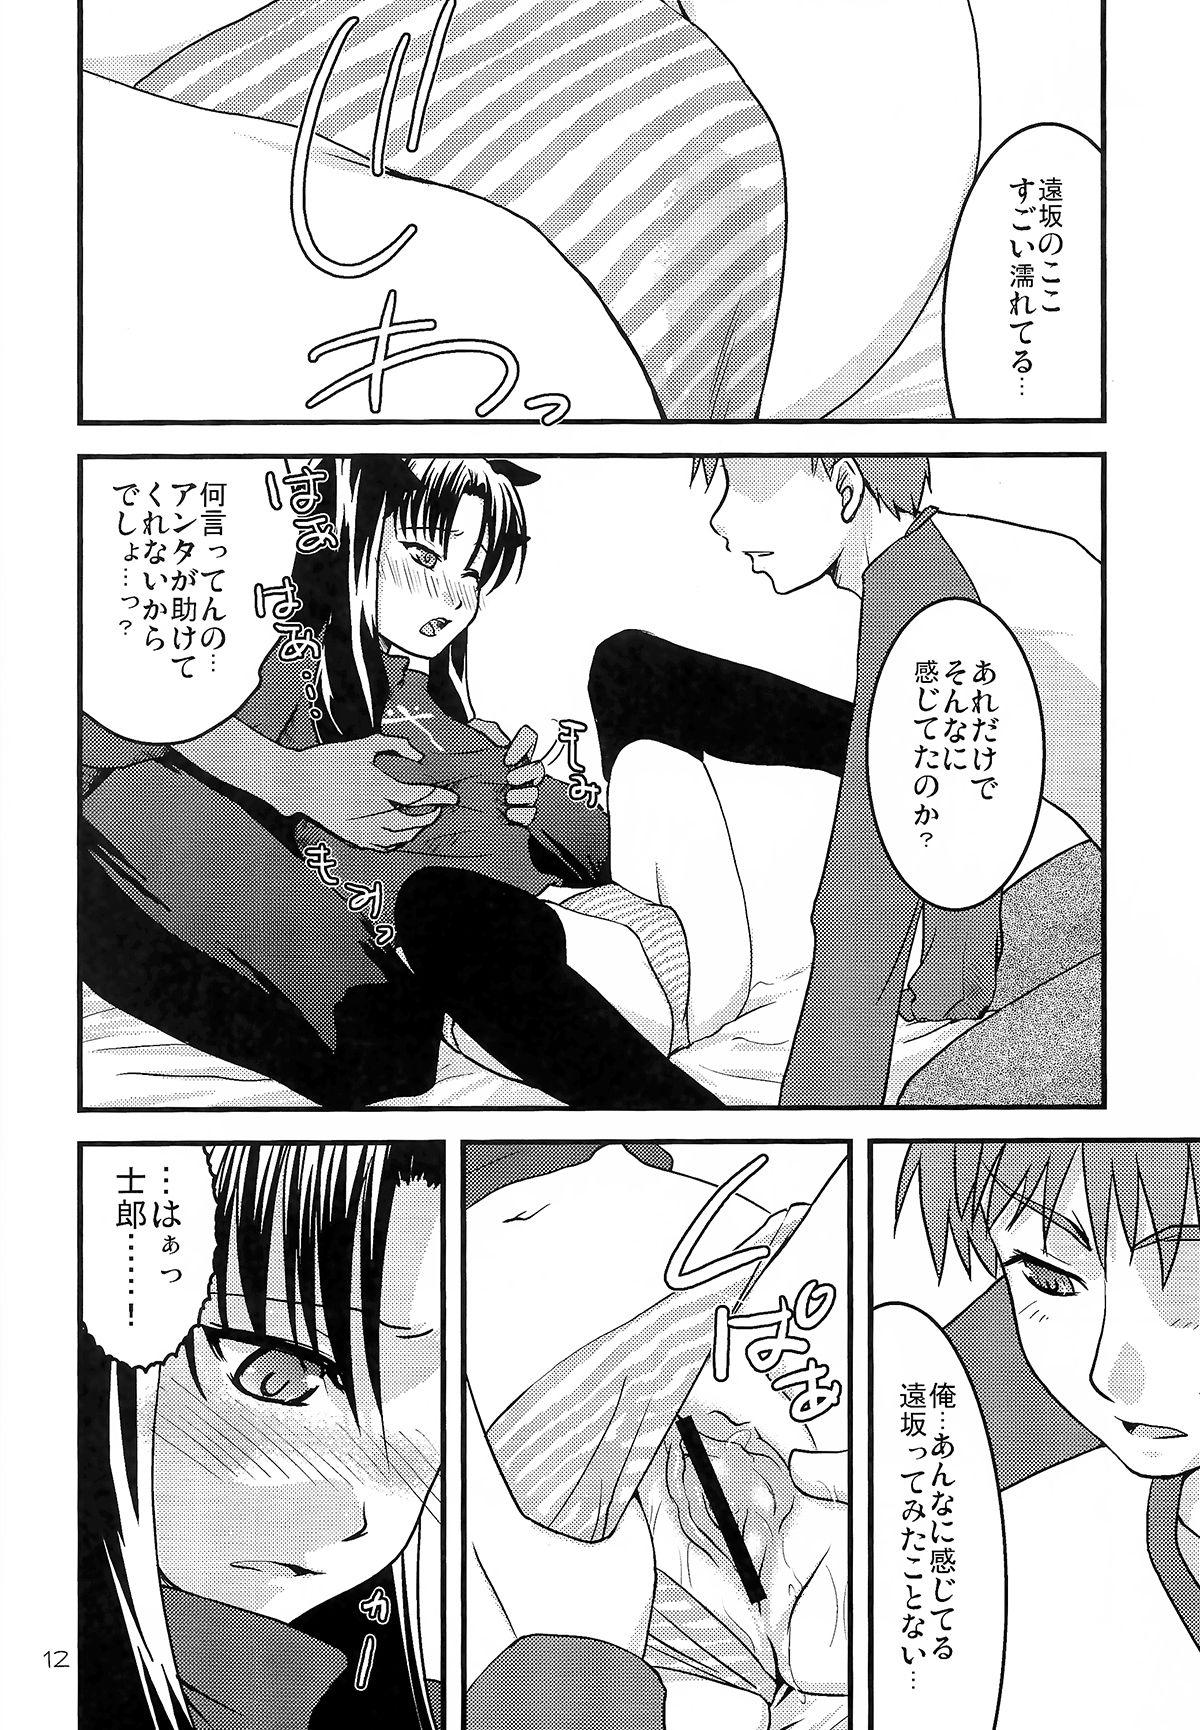 Buceta Fakers - Fate stay night Gay Blackhair - Page 11